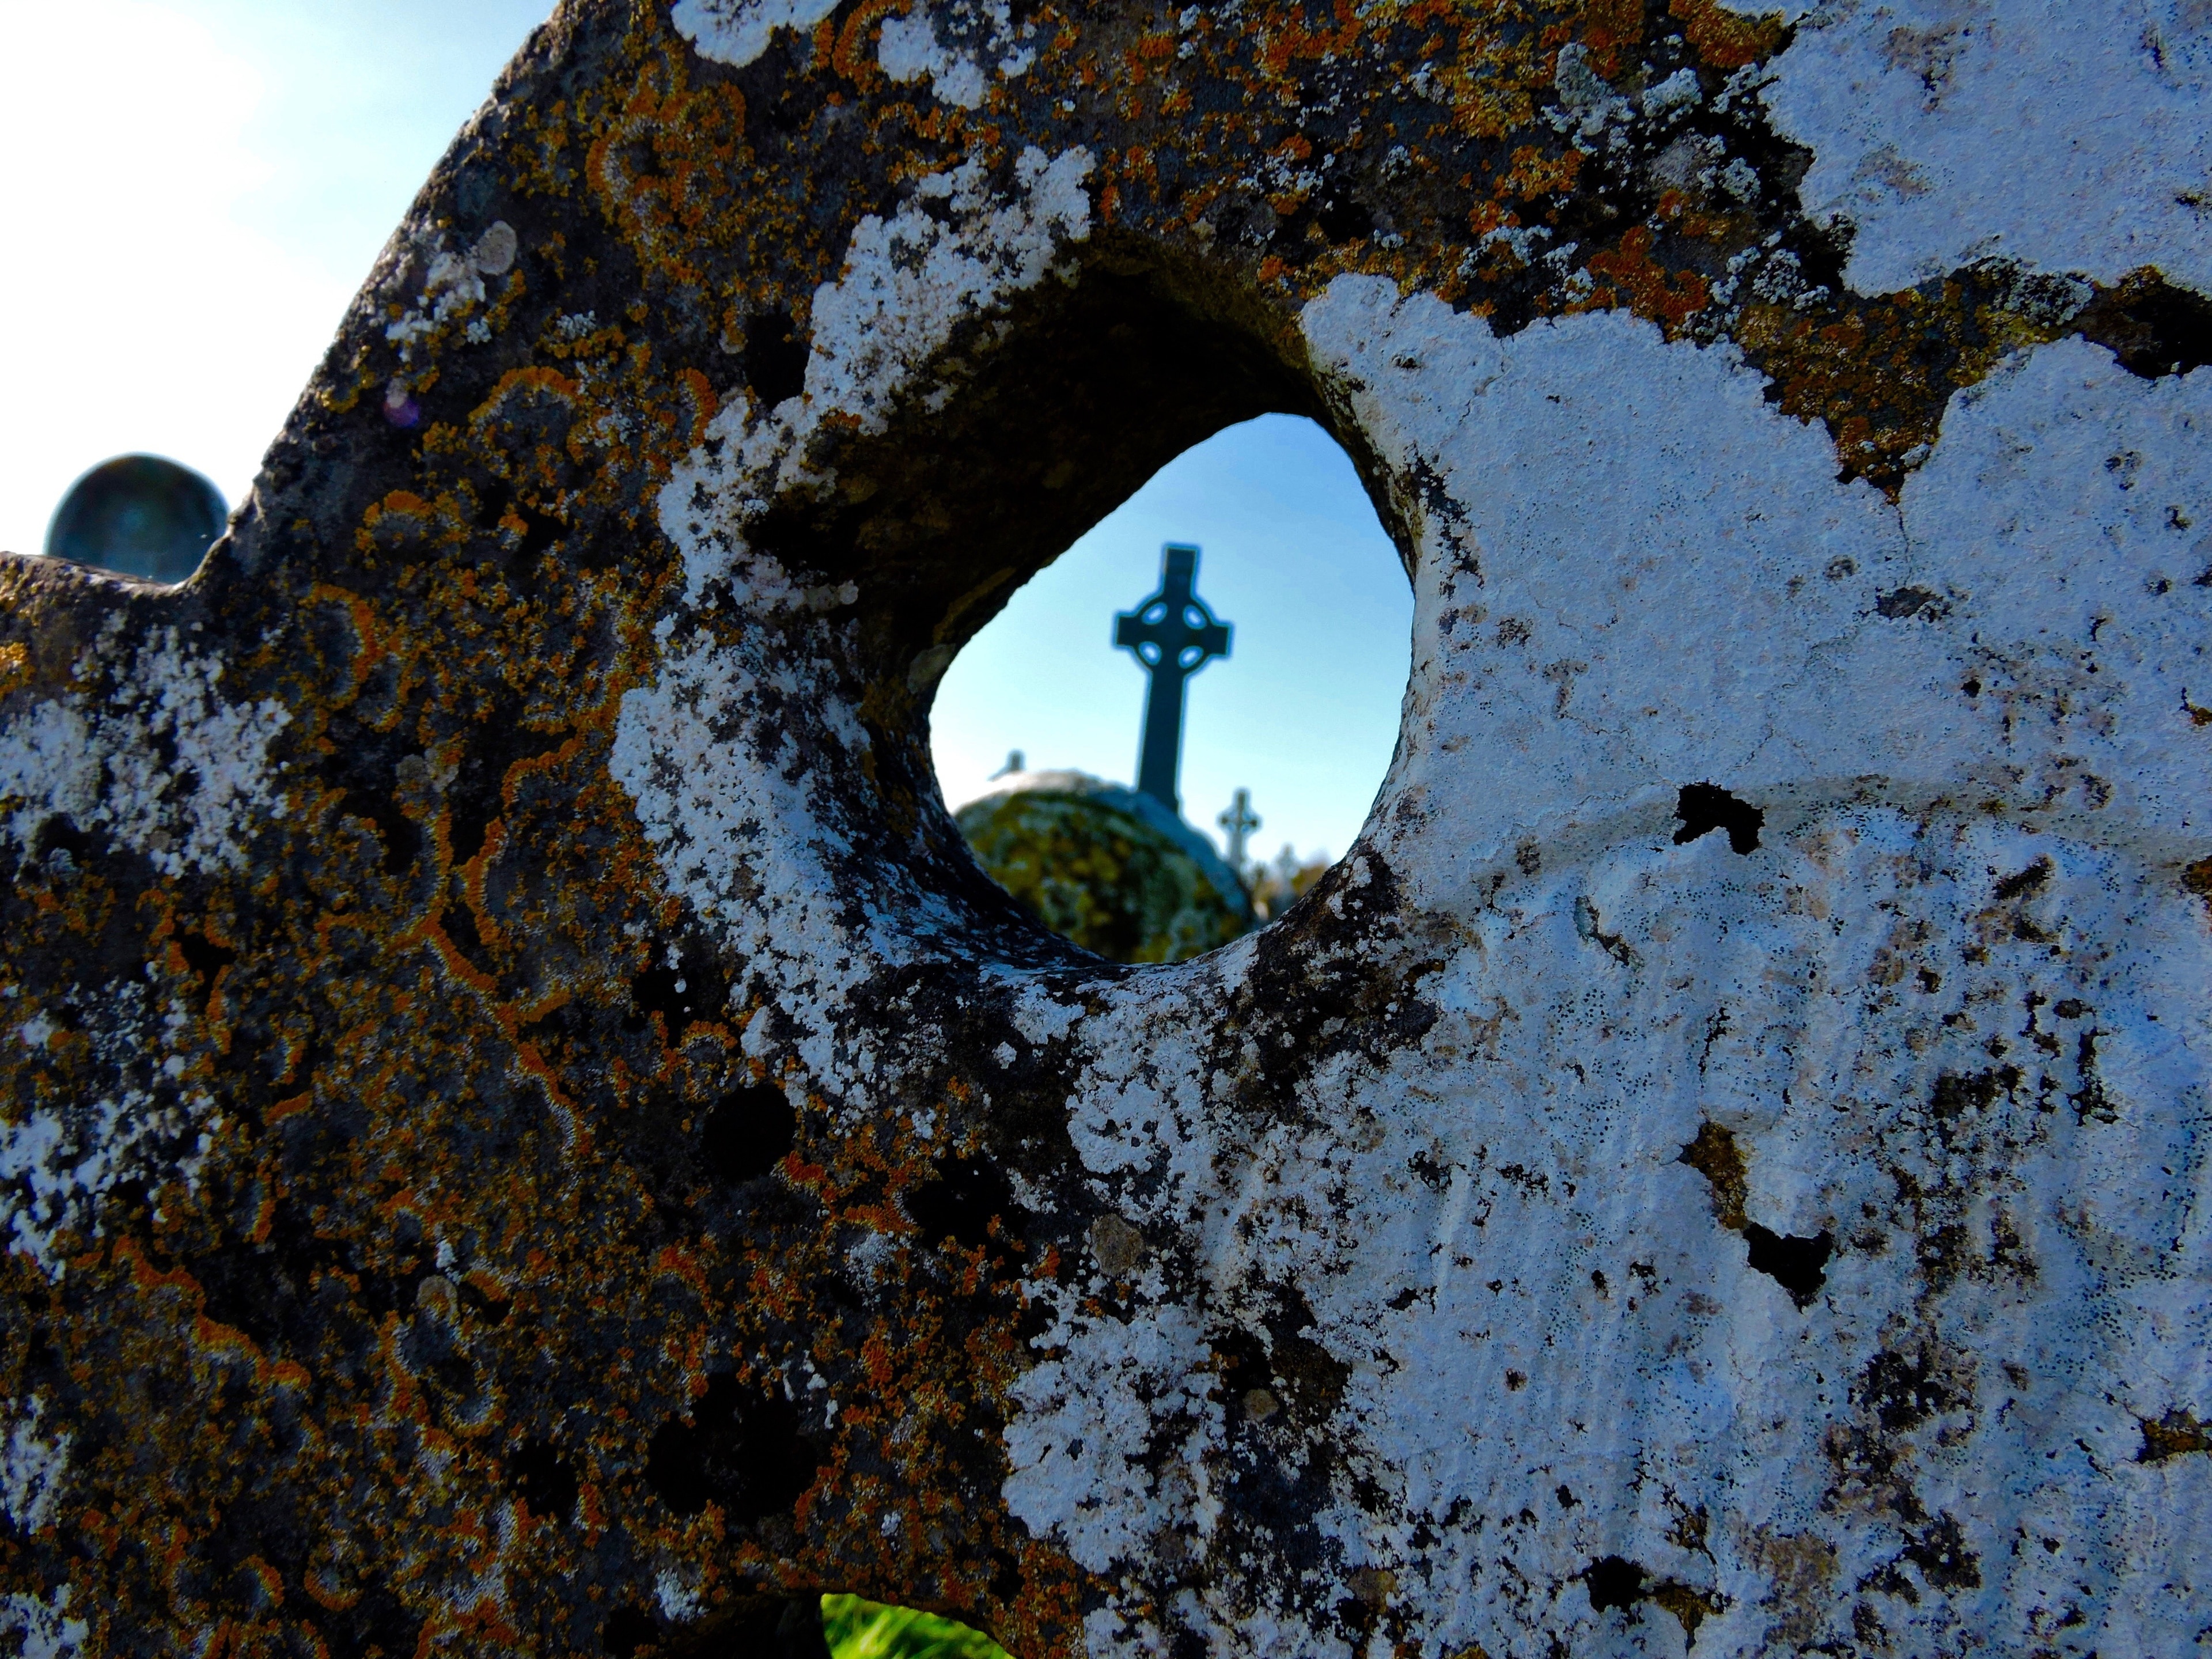 Ireland is dotted with stone and crosses #culture